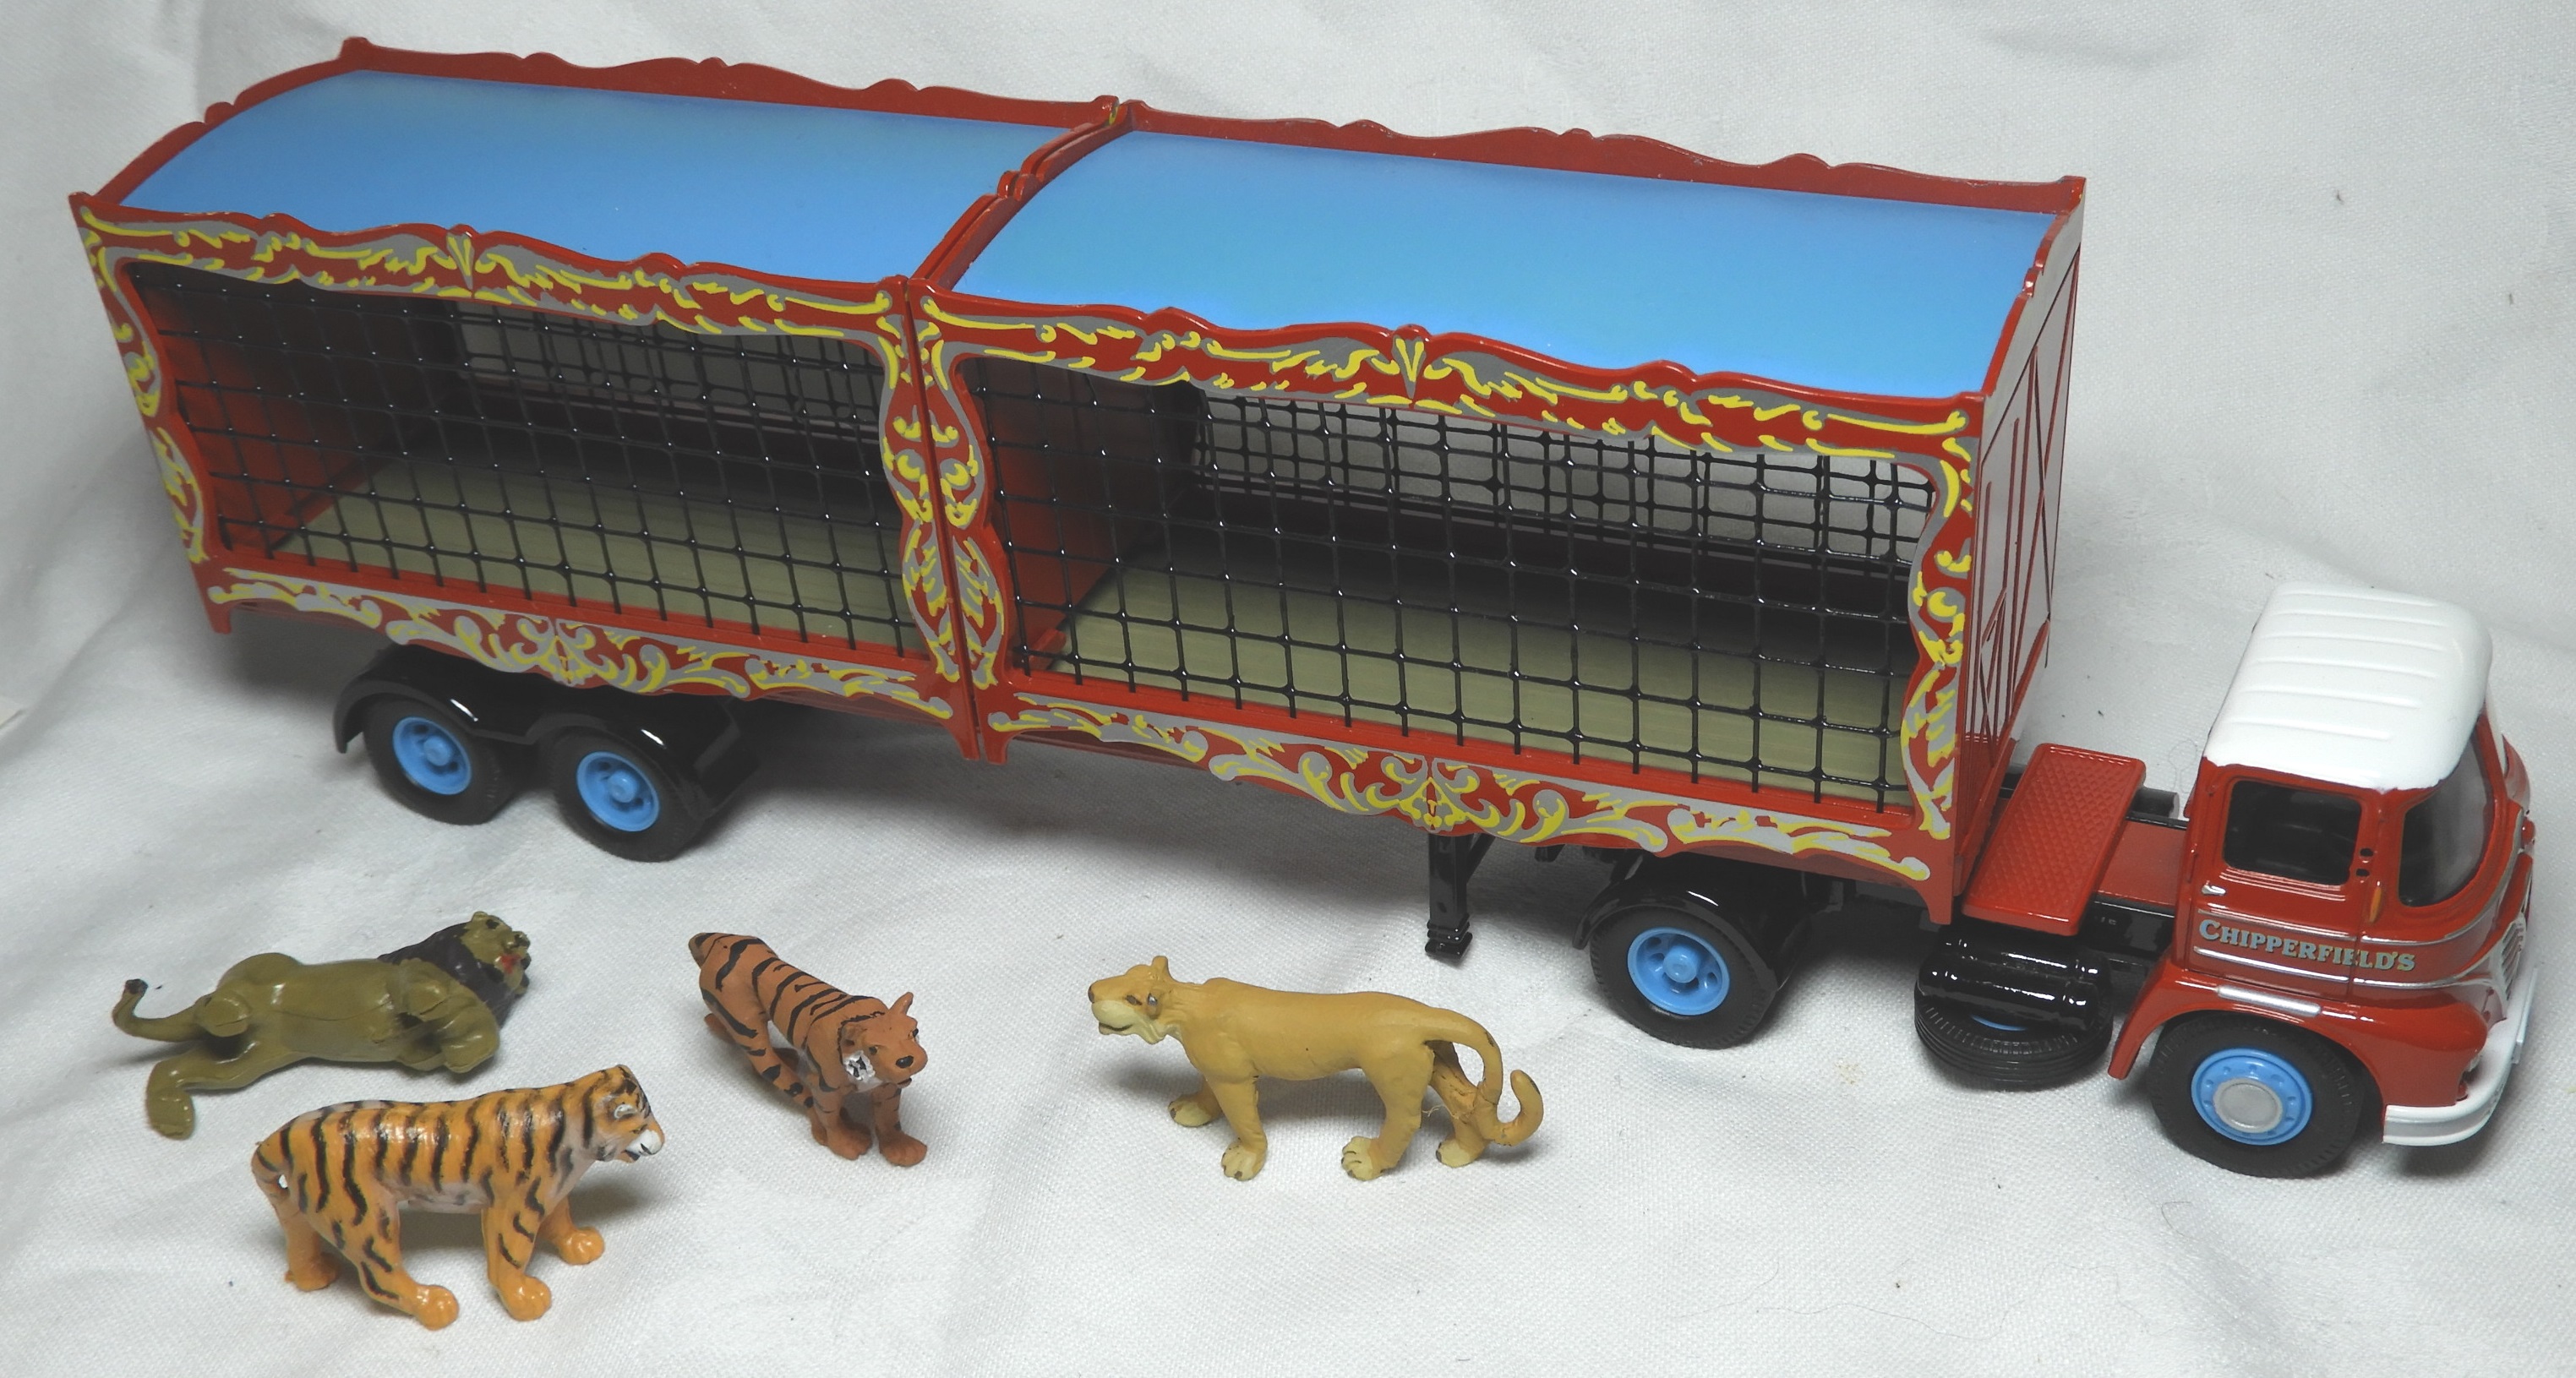 CORGI CHIPPERFIELDS CIRCUS ARTICULATED TRUCK & 2 ANIMAL CAGES